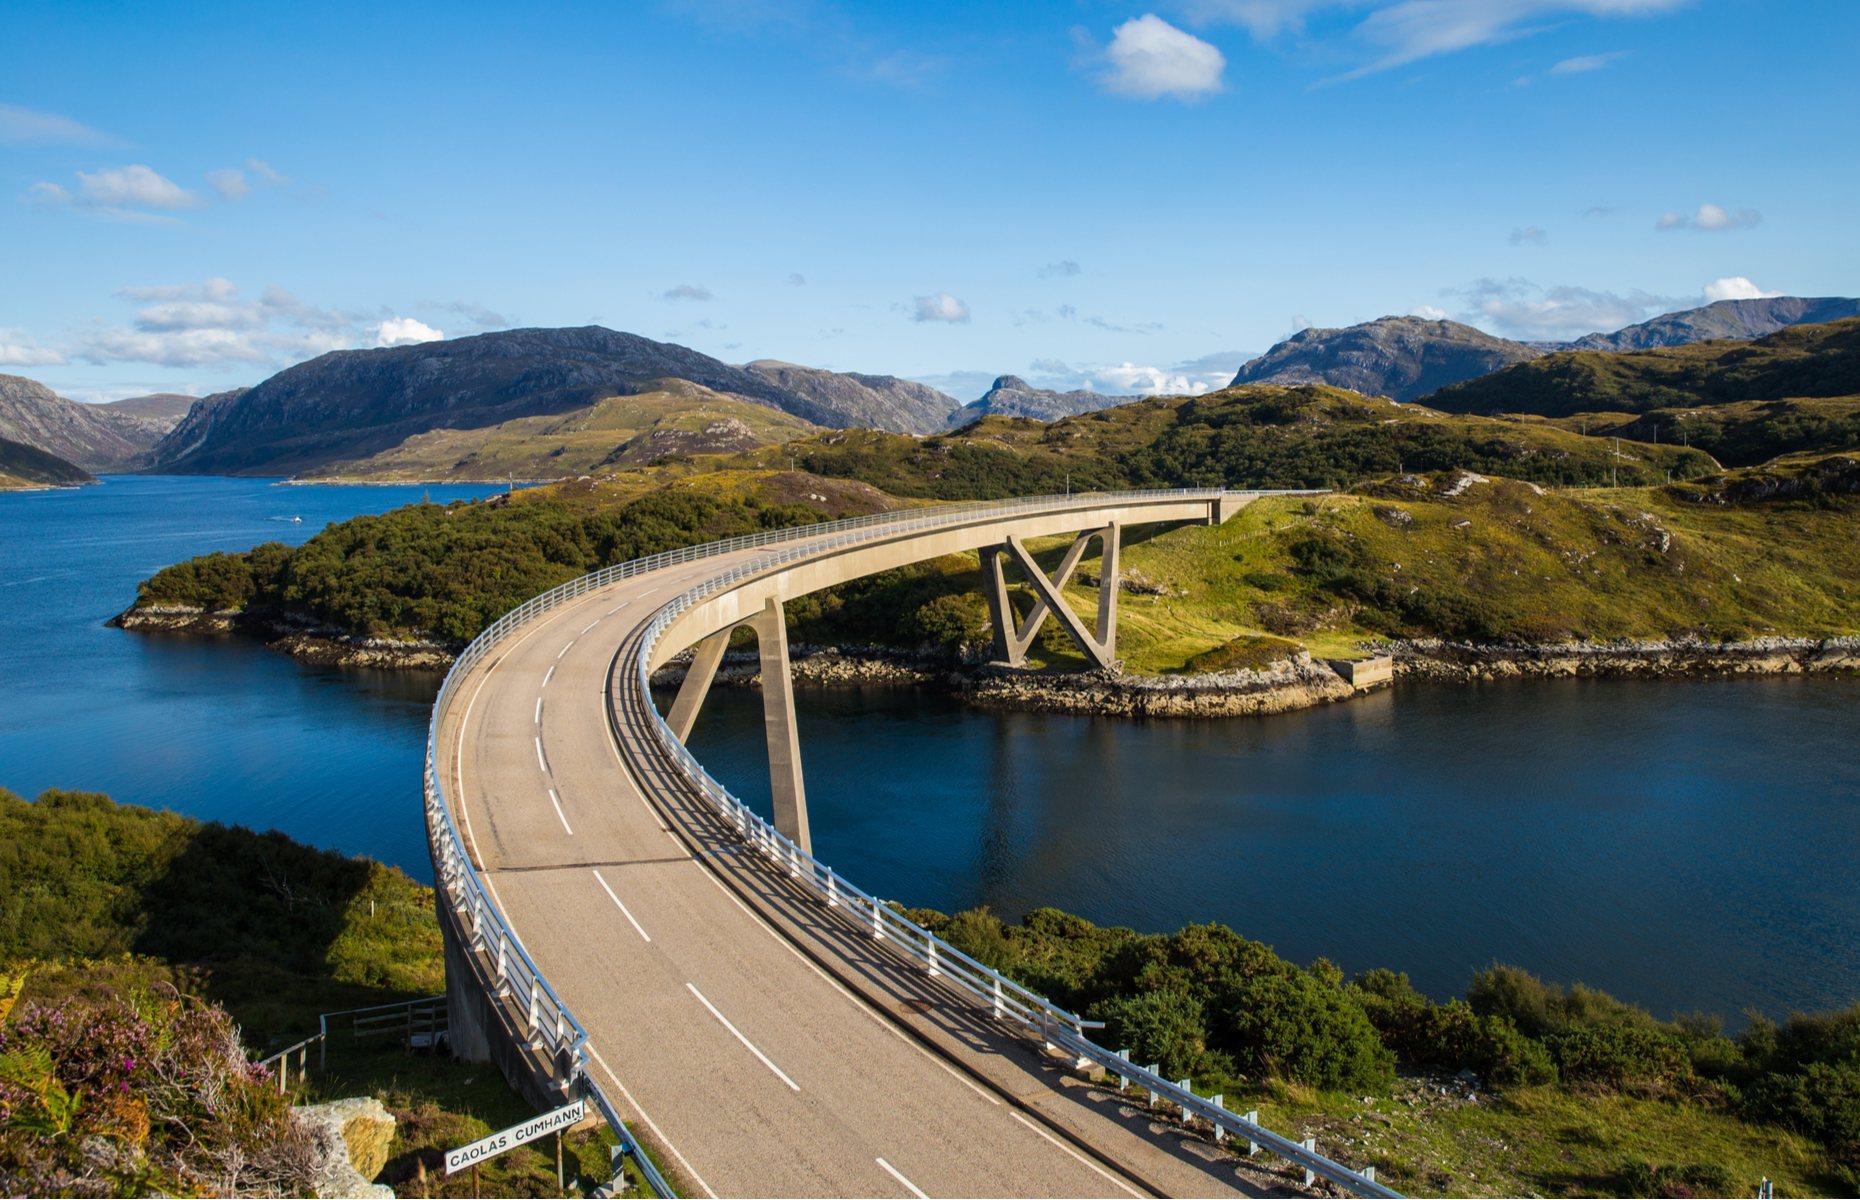 <p>From craggy cliffs and gorgeous lochs to thundering waterfalls and sandy beaches, the North Coast 500 trails through some of the best of Scotland’s coastal scenery. Hailed as Scotland’s “answer to route 66” the impressive road stretches for a whopping 516 miles (830km) along the coastal edges of the Northern Highlands, looping through some of the prettiest regions including Sutherland, Wester Ross and Inverness-shire. Passing along the coastline, the journey begins and ends at the magnificent Inverness Castle, a glorious starting and finishing point for the scenic drive. </p>